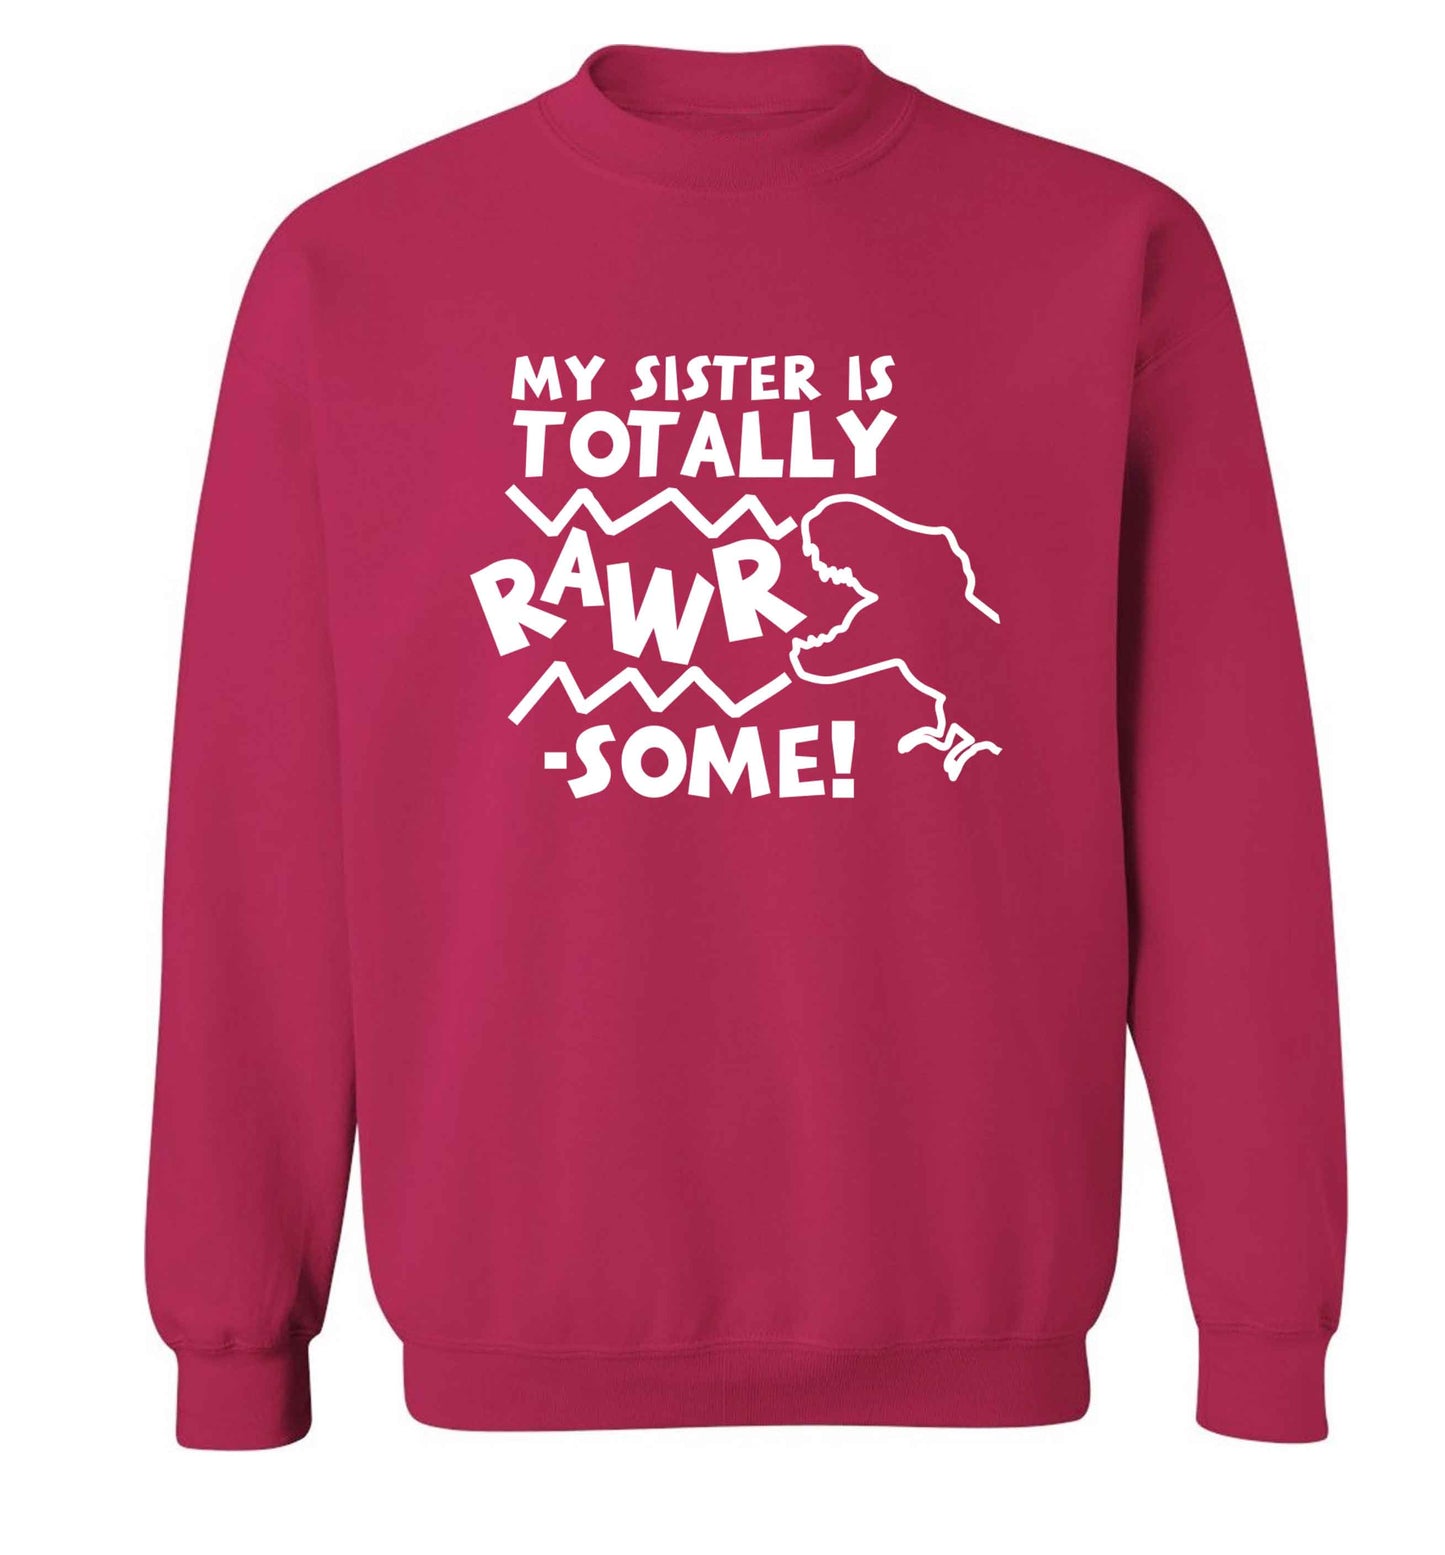 My sister is totally rawrsome adult's unisex pink sweater 2XL